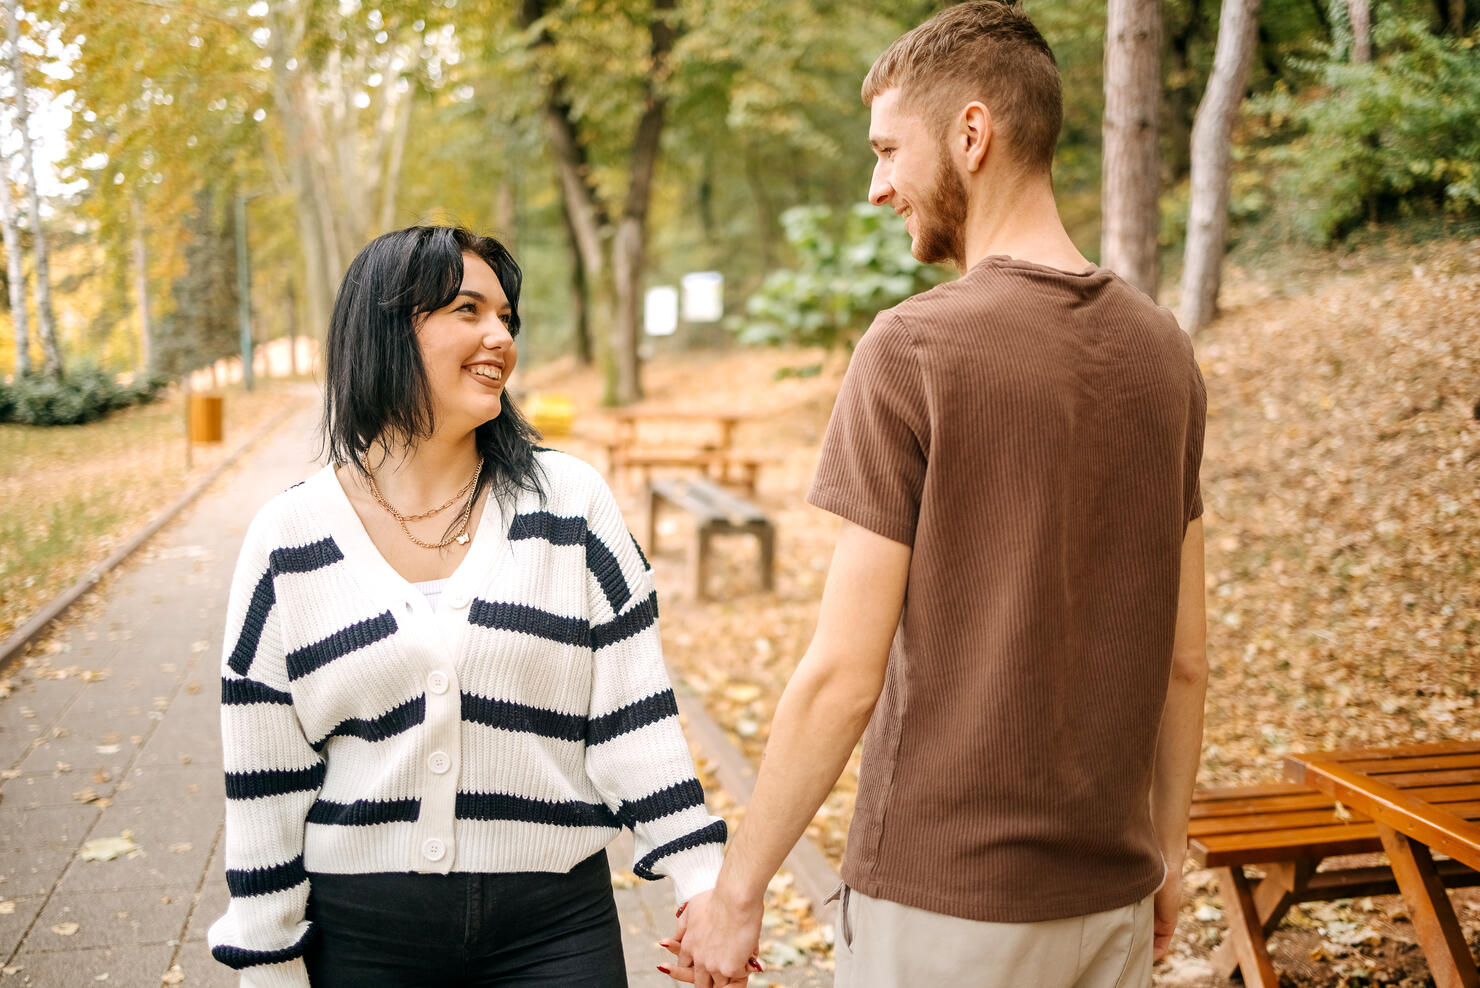 Millennial generation couple spending time outside in Autumn holding hands